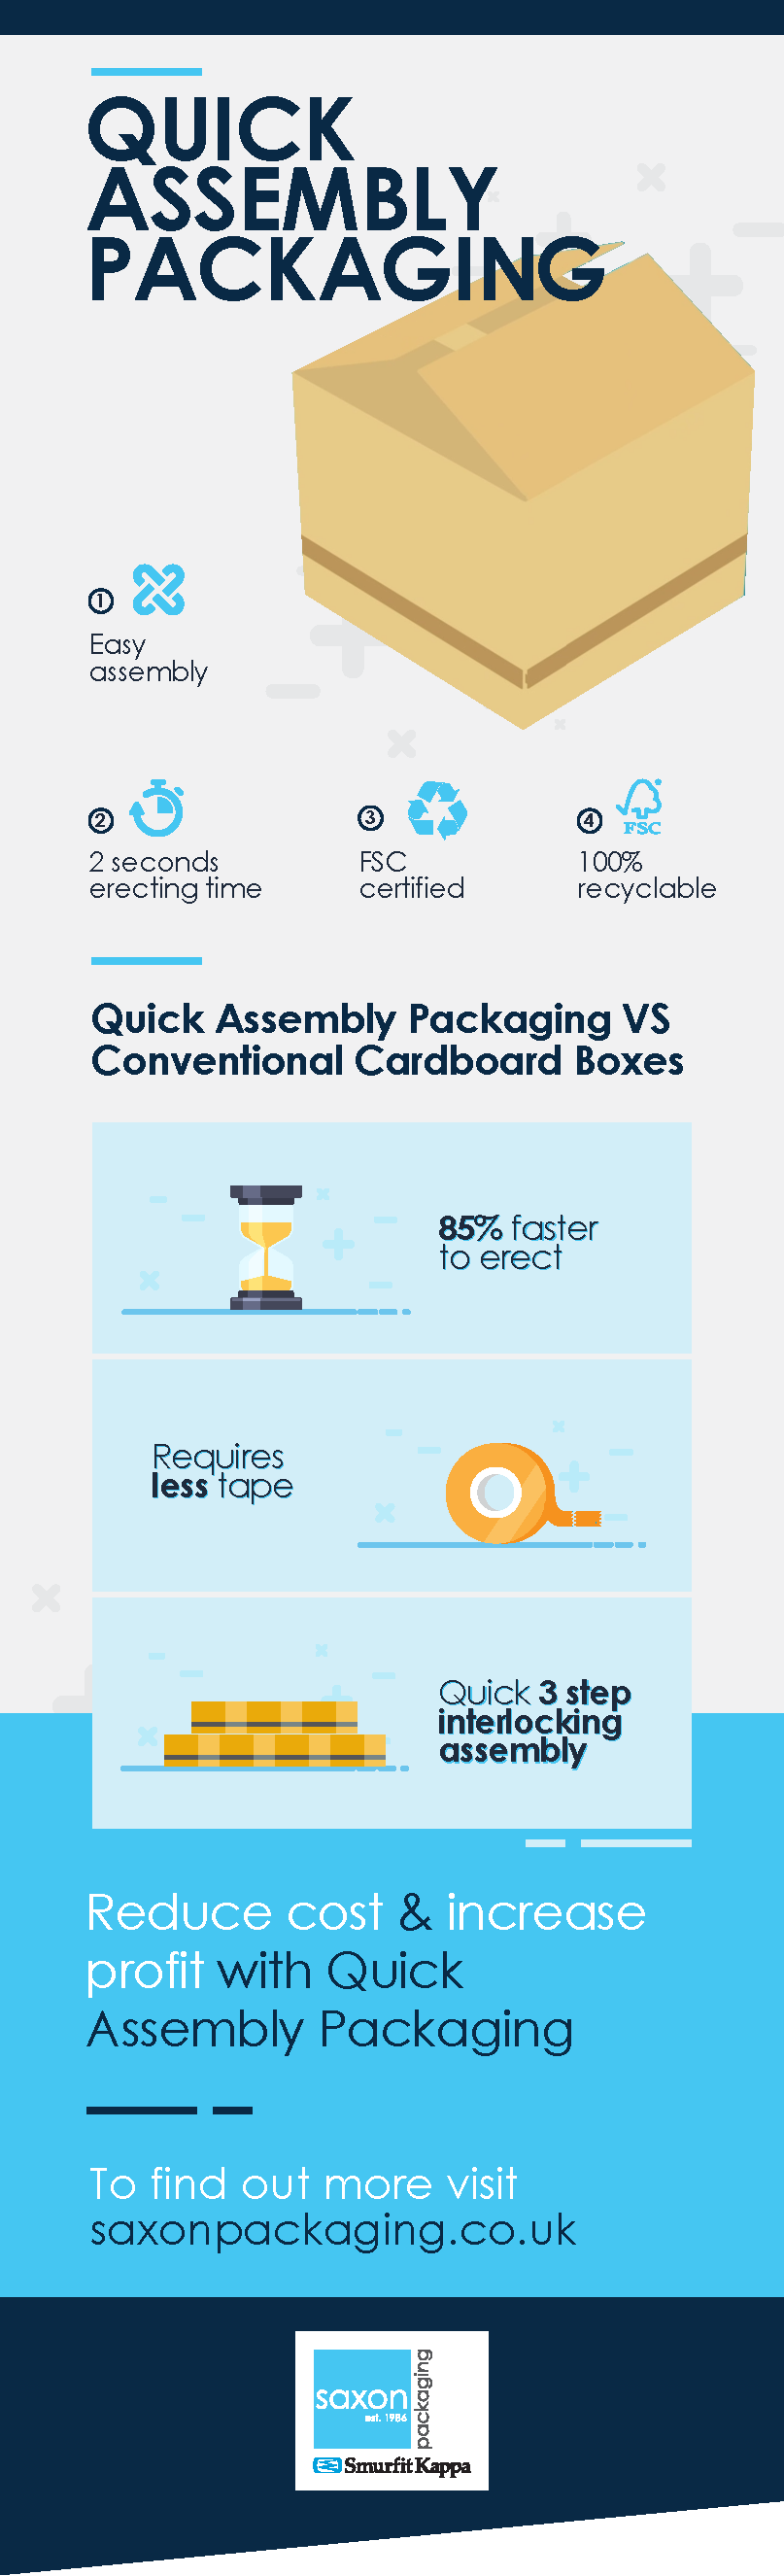 Quick Assembly Packaging Infographic